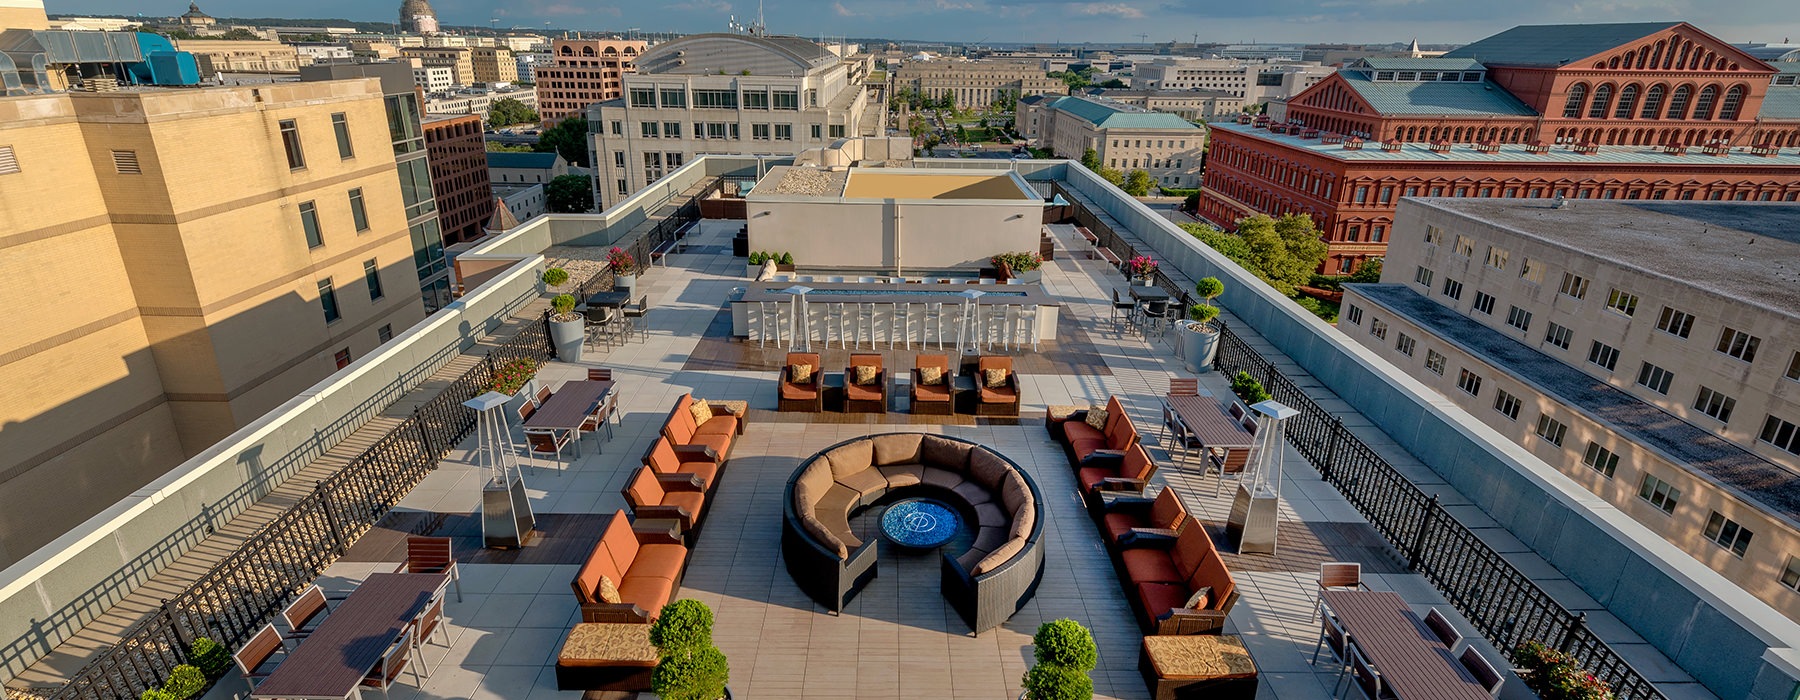 rooftop patio with view of city